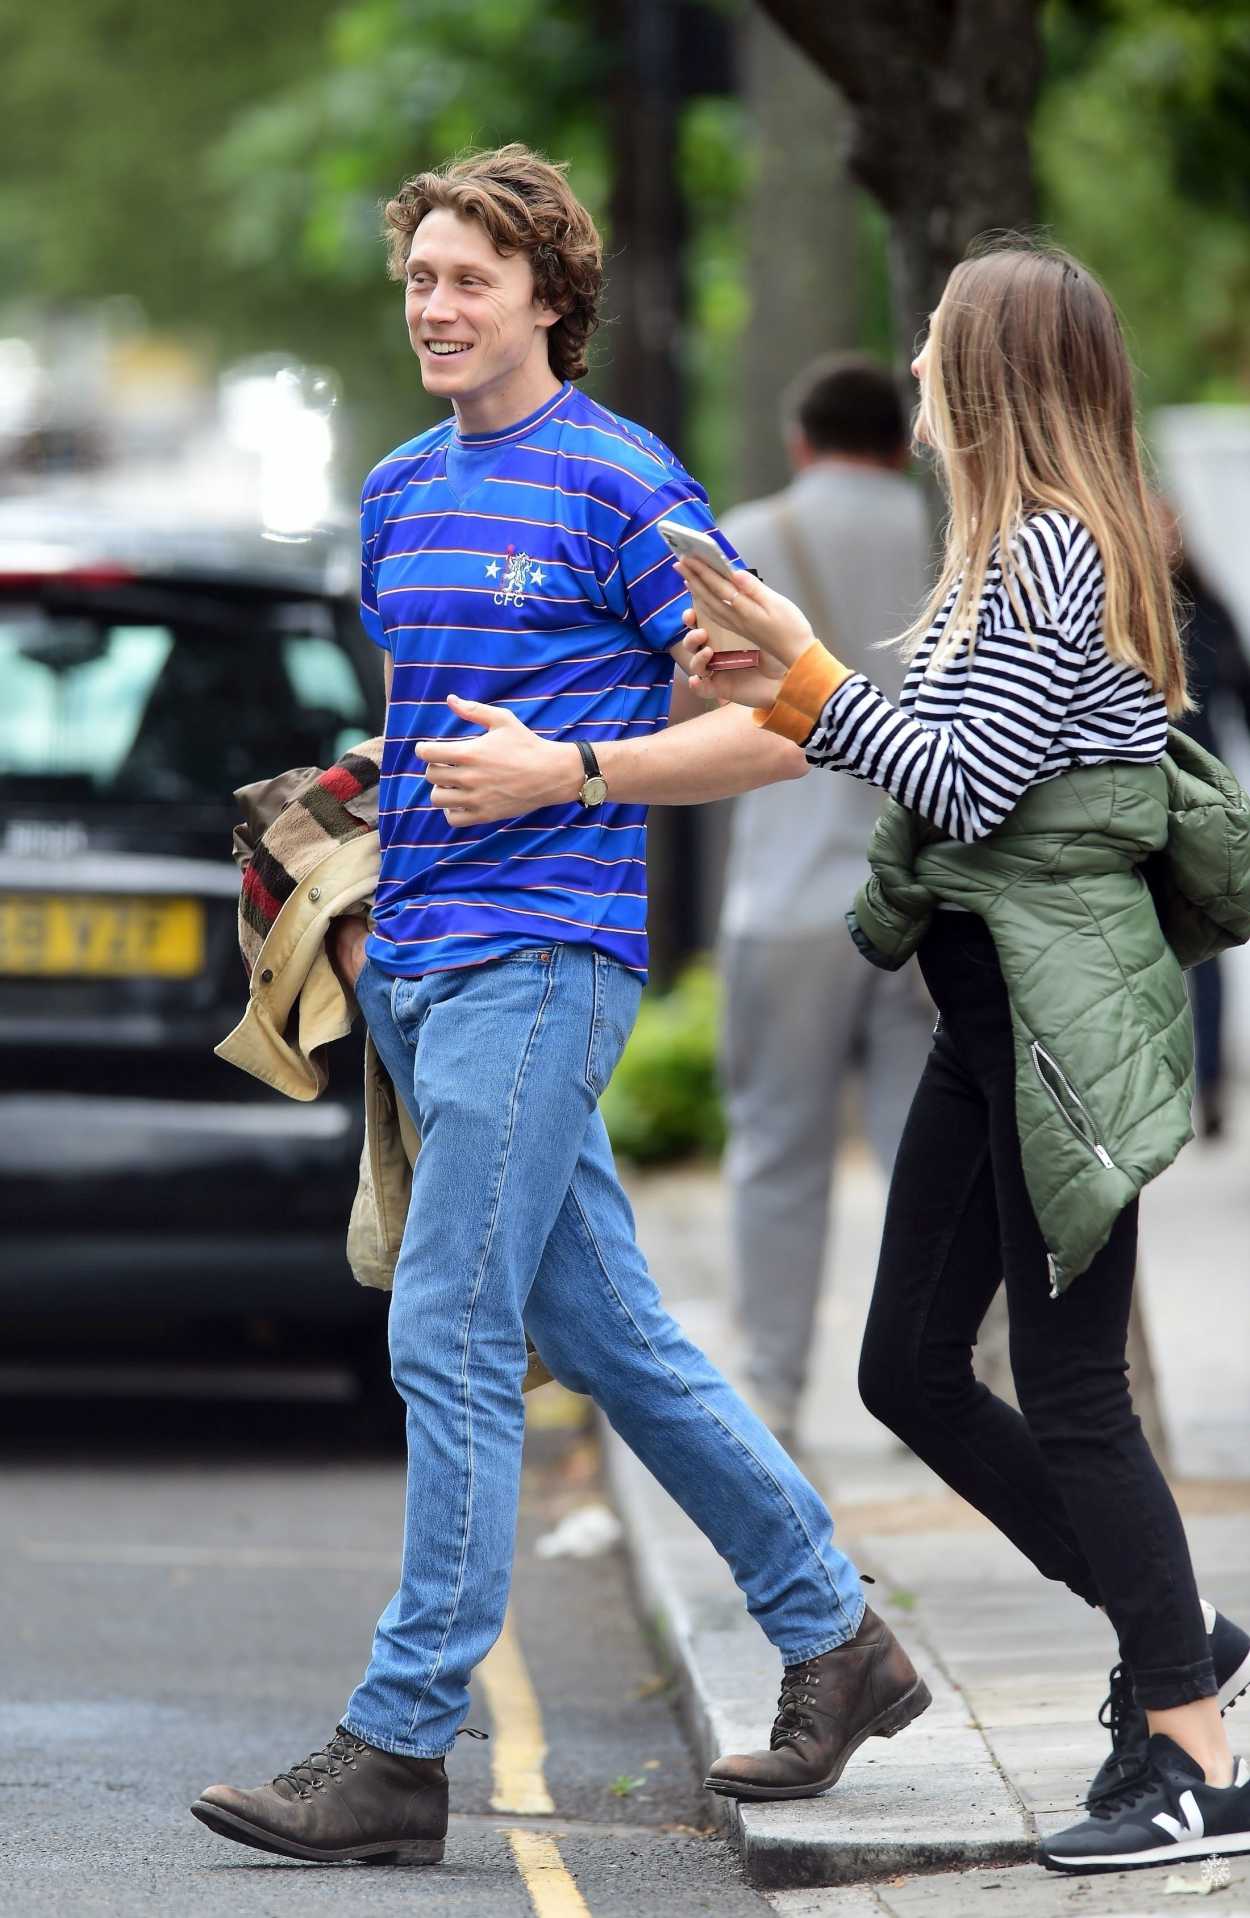 George MacKay in a Blue Striped T-Shirt Was Seen Out with His Girlfriend in...